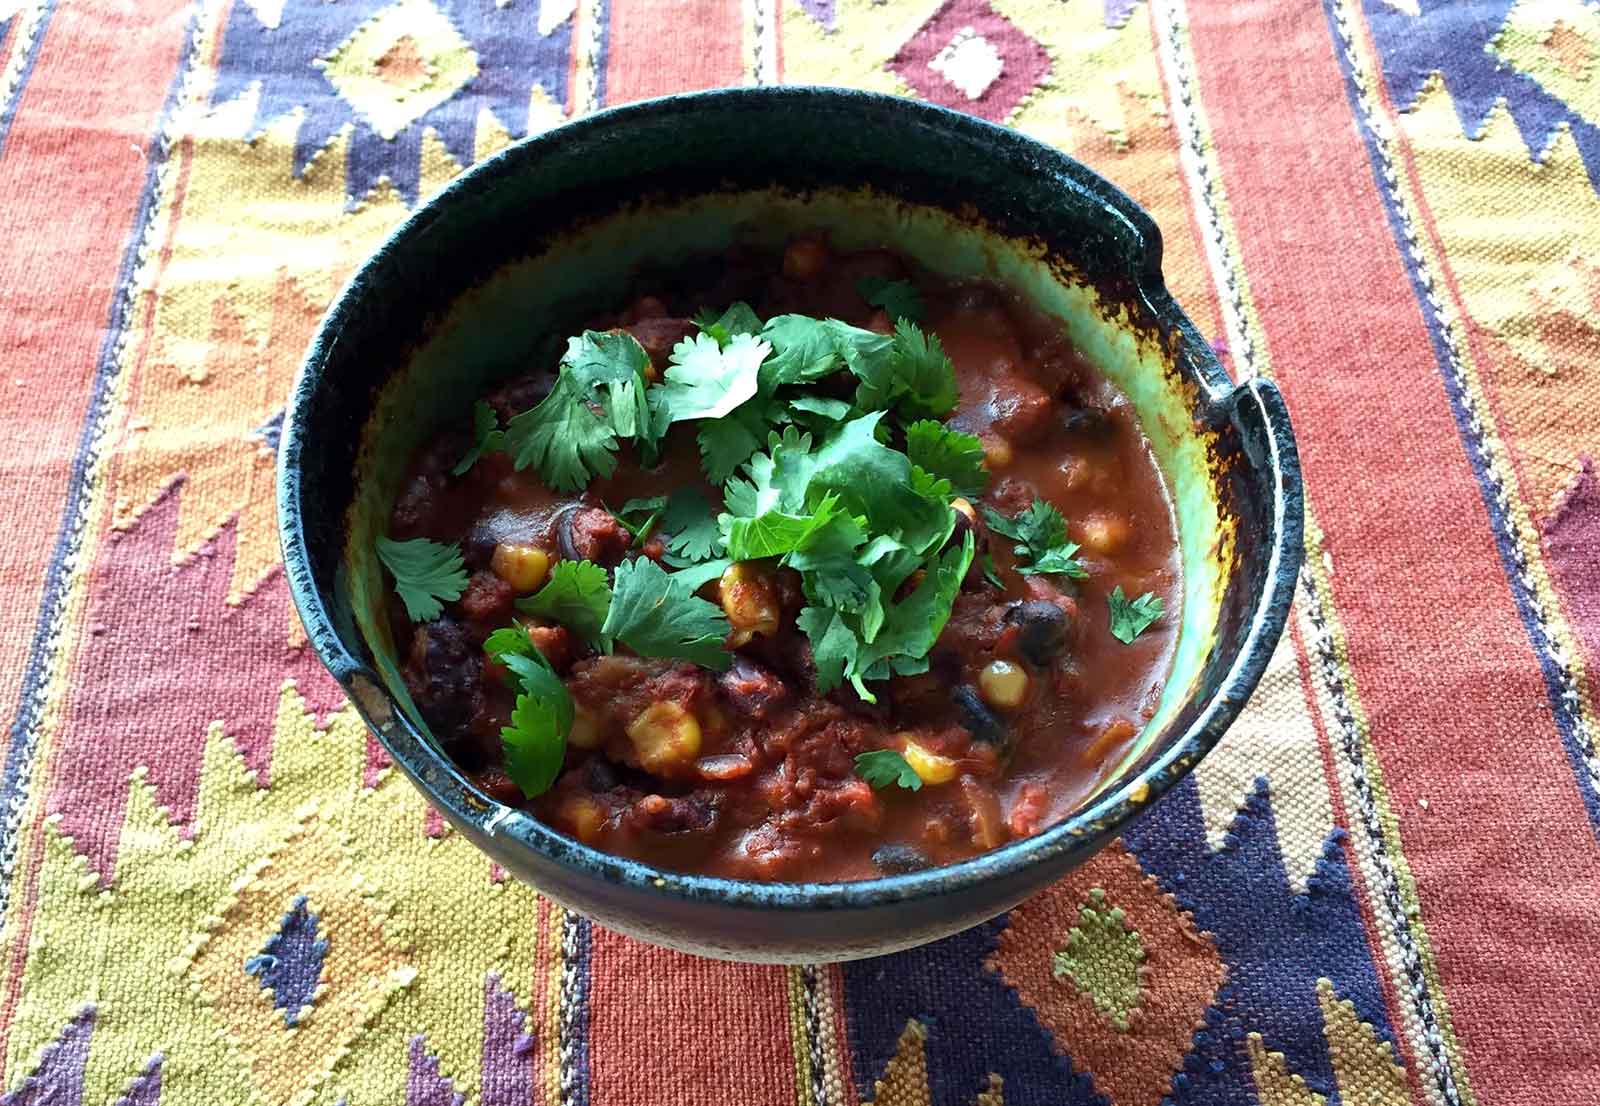 Photo of a bowl of high-protein, high-calorie bulking chili.